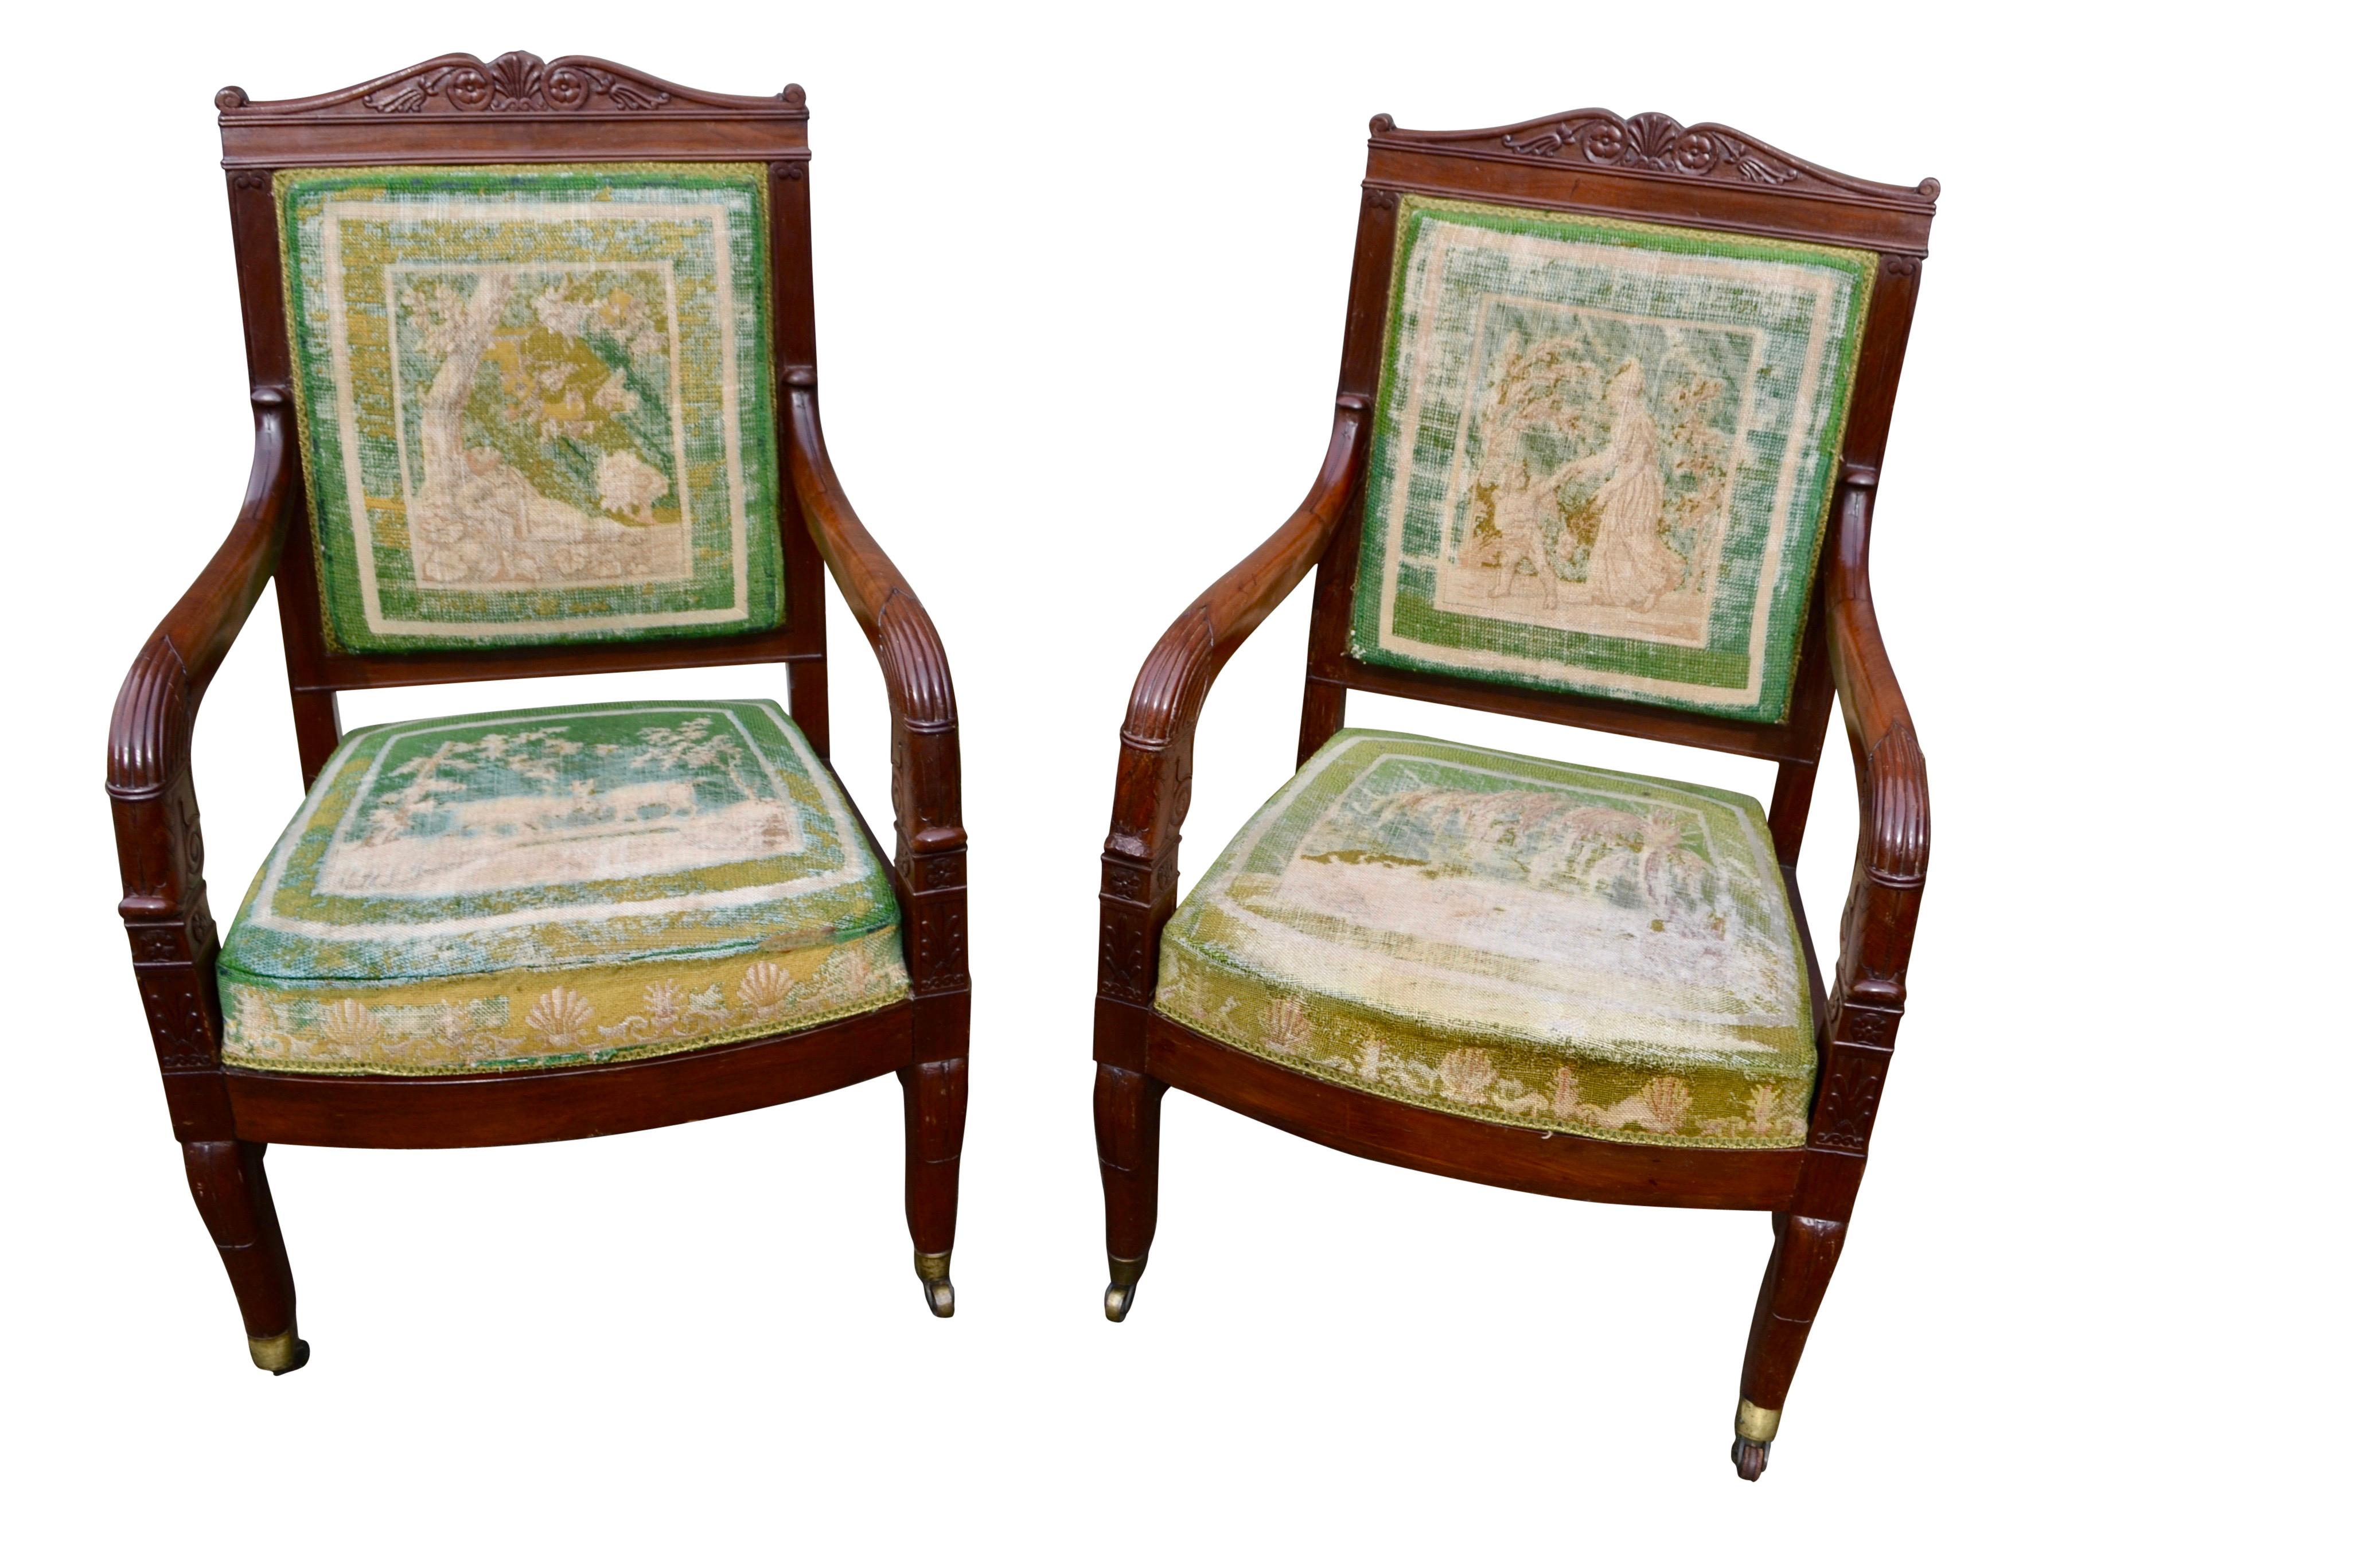 A classic pair of French Empire period open armchairs  each with a square back topped by a bow shaped carved frieze featuring folliate rosettes and downscrolled arms. Where the arms join the chair rail there are carved anthemians and palmettes.